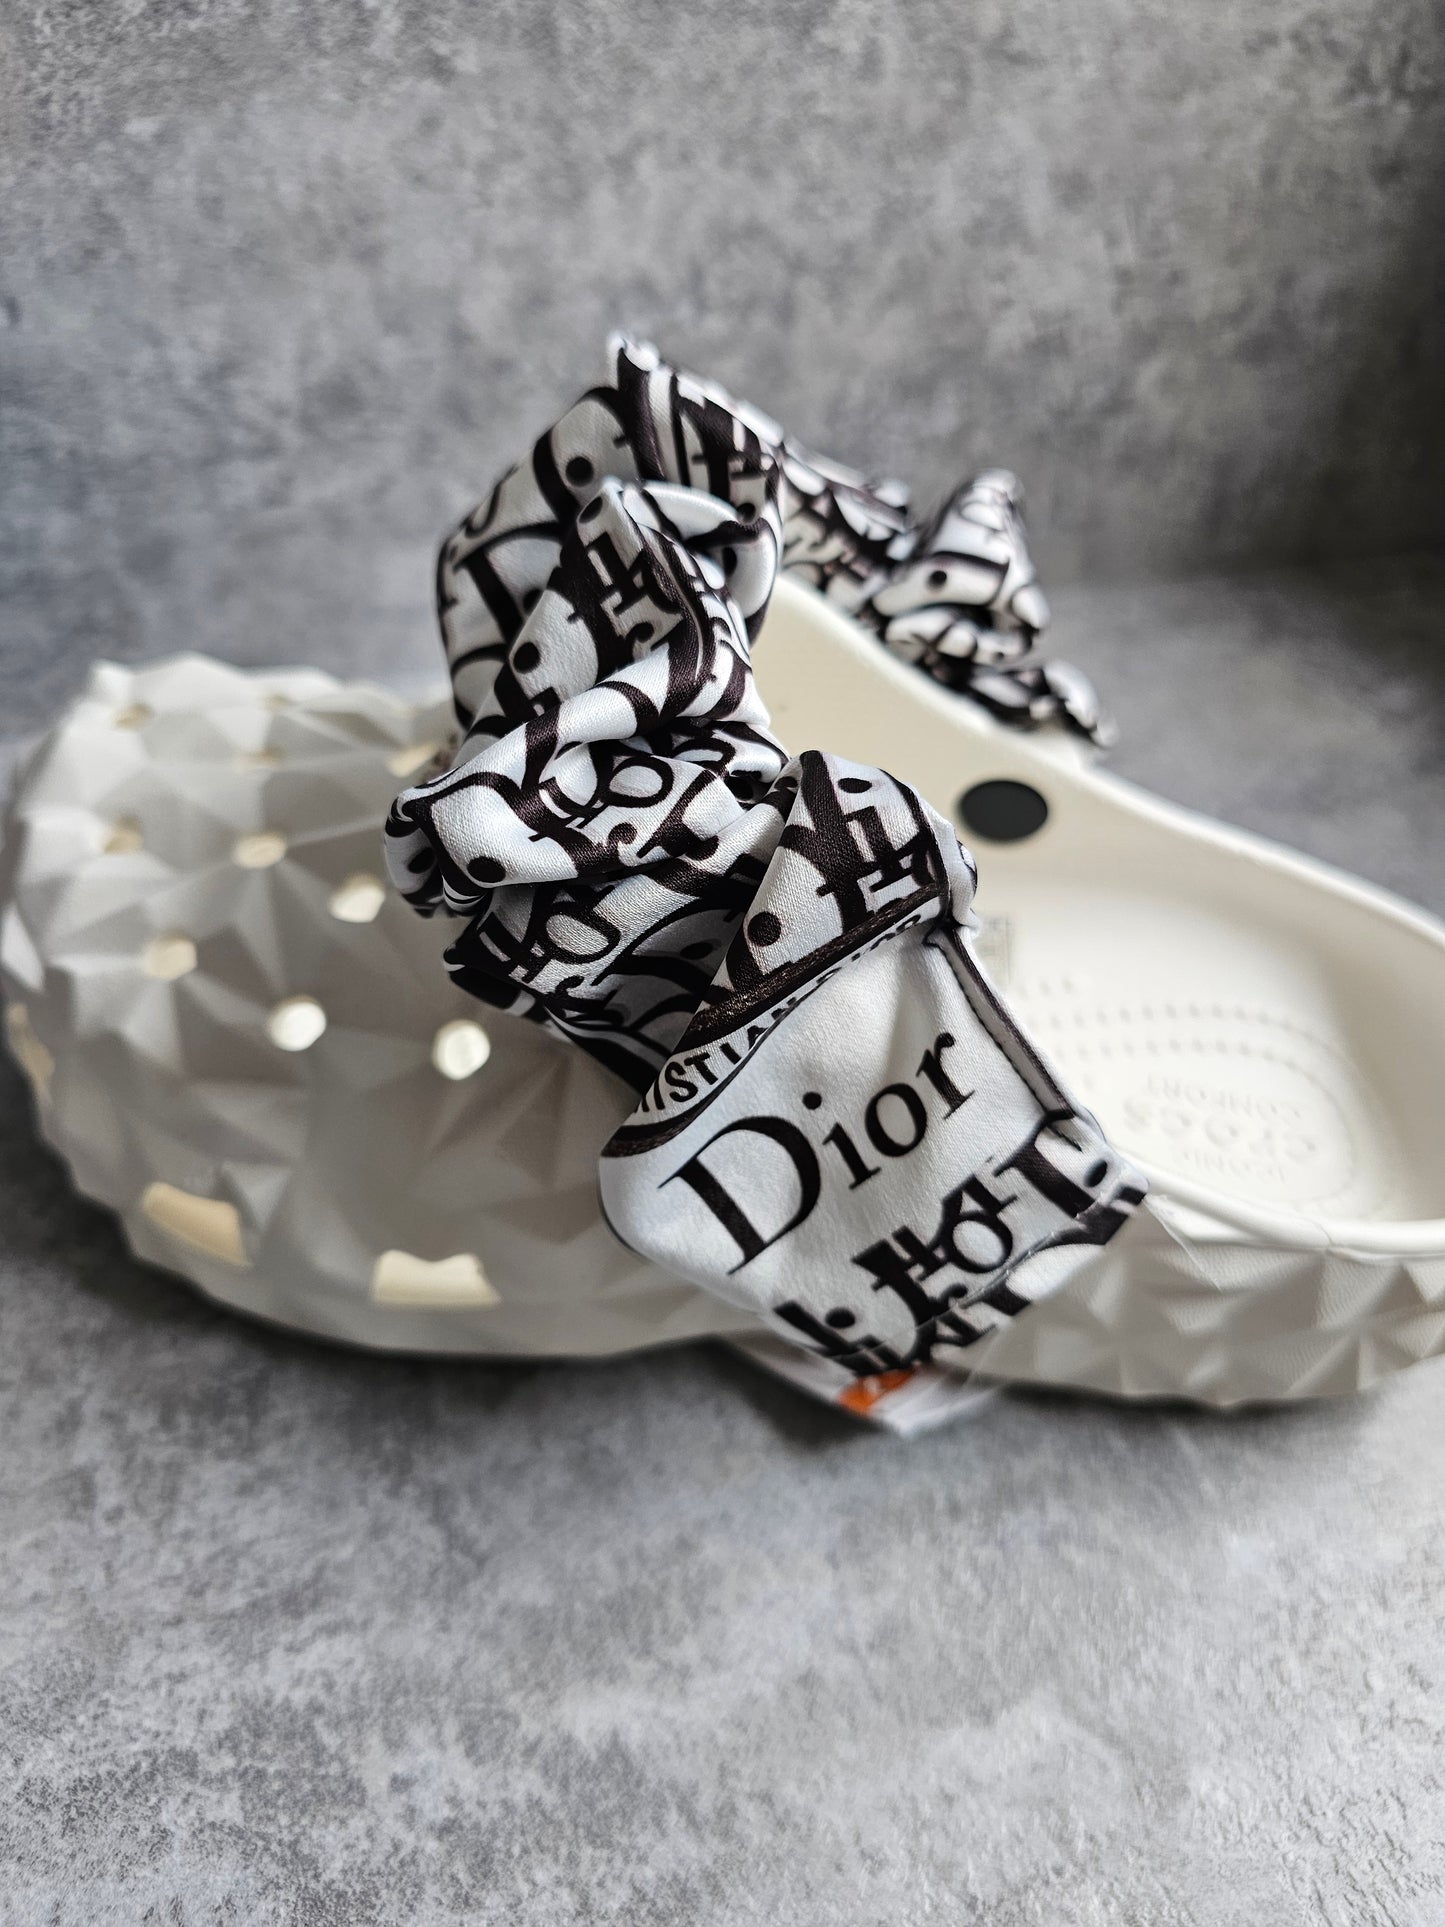 New style Dior black and white printed Croc strap covers, come in pairs!